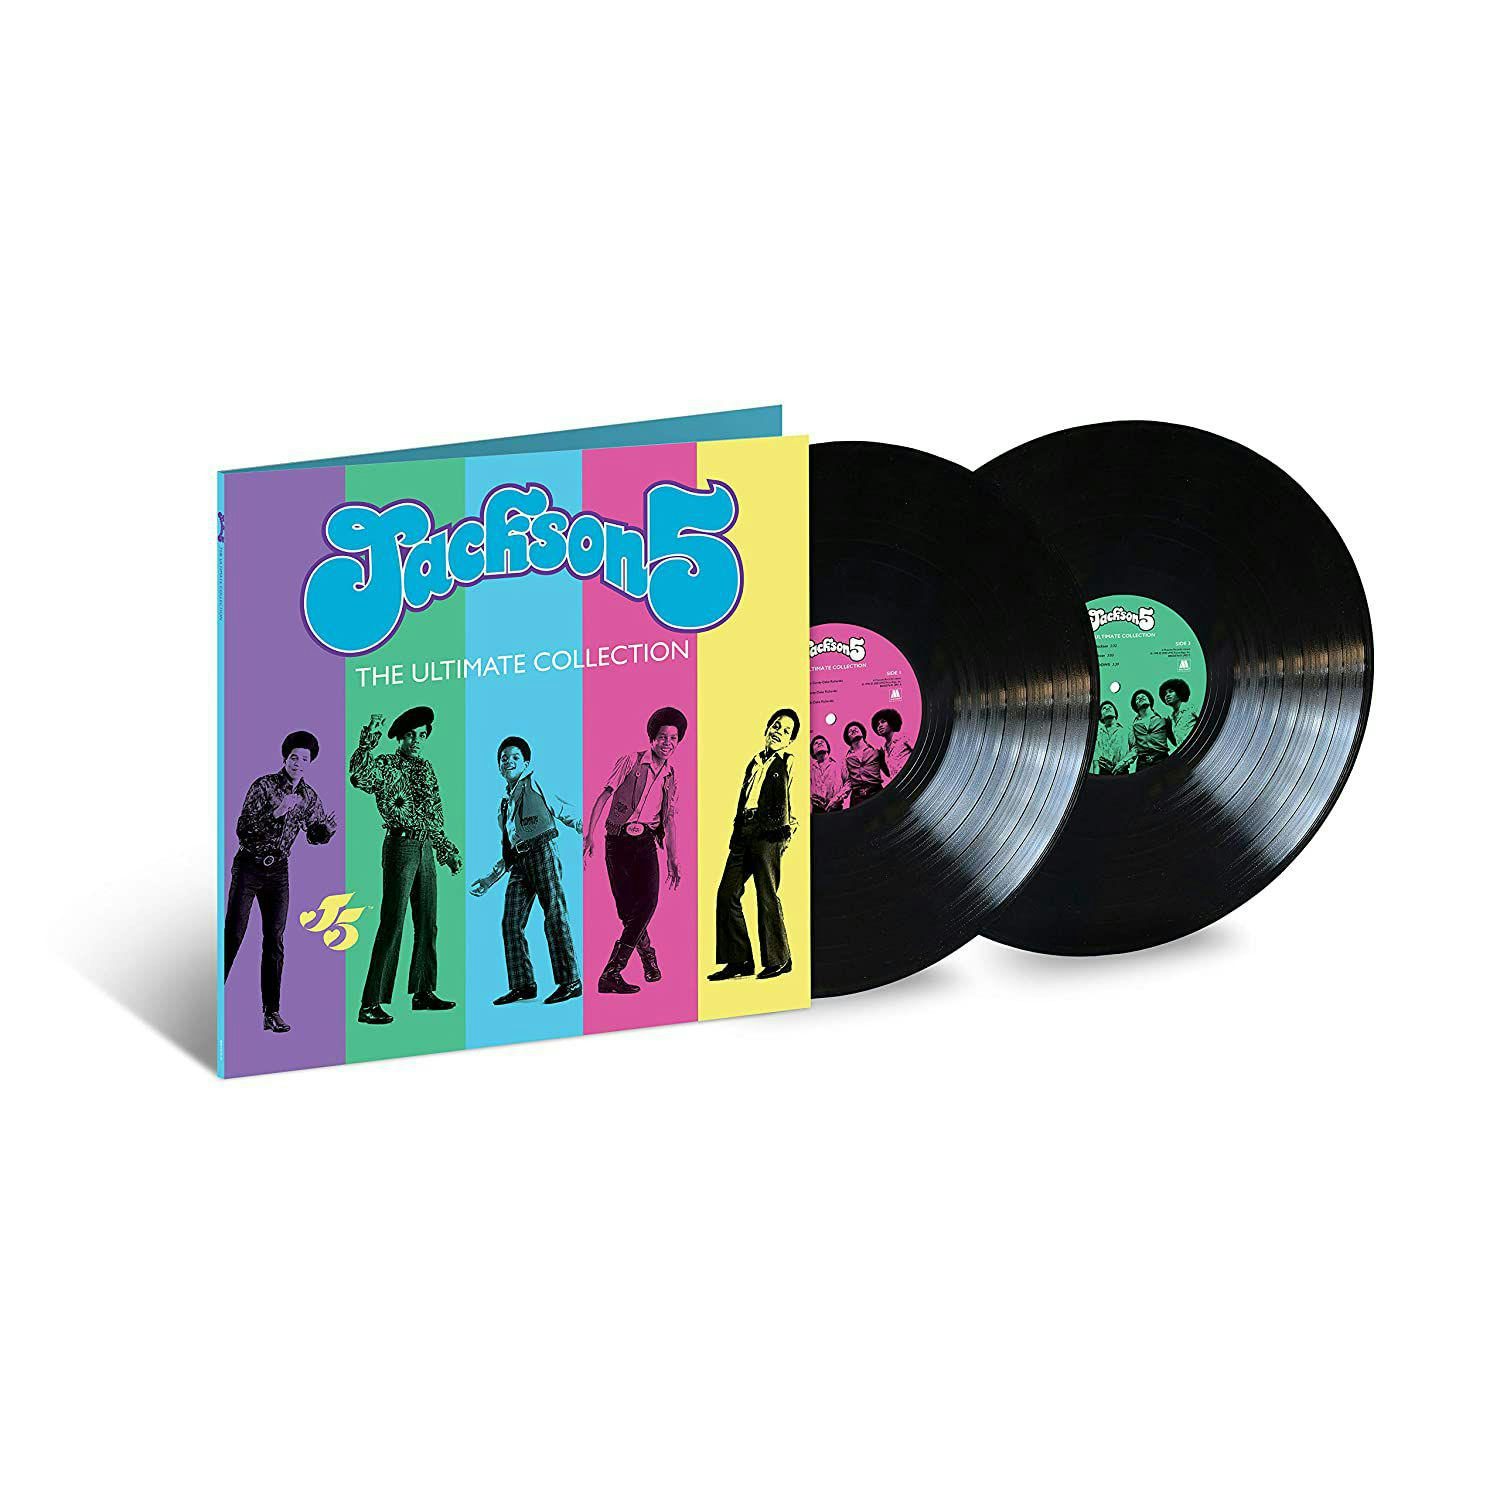 Ultimate Collection (2LP) Vinyl Record - The Jackson 5